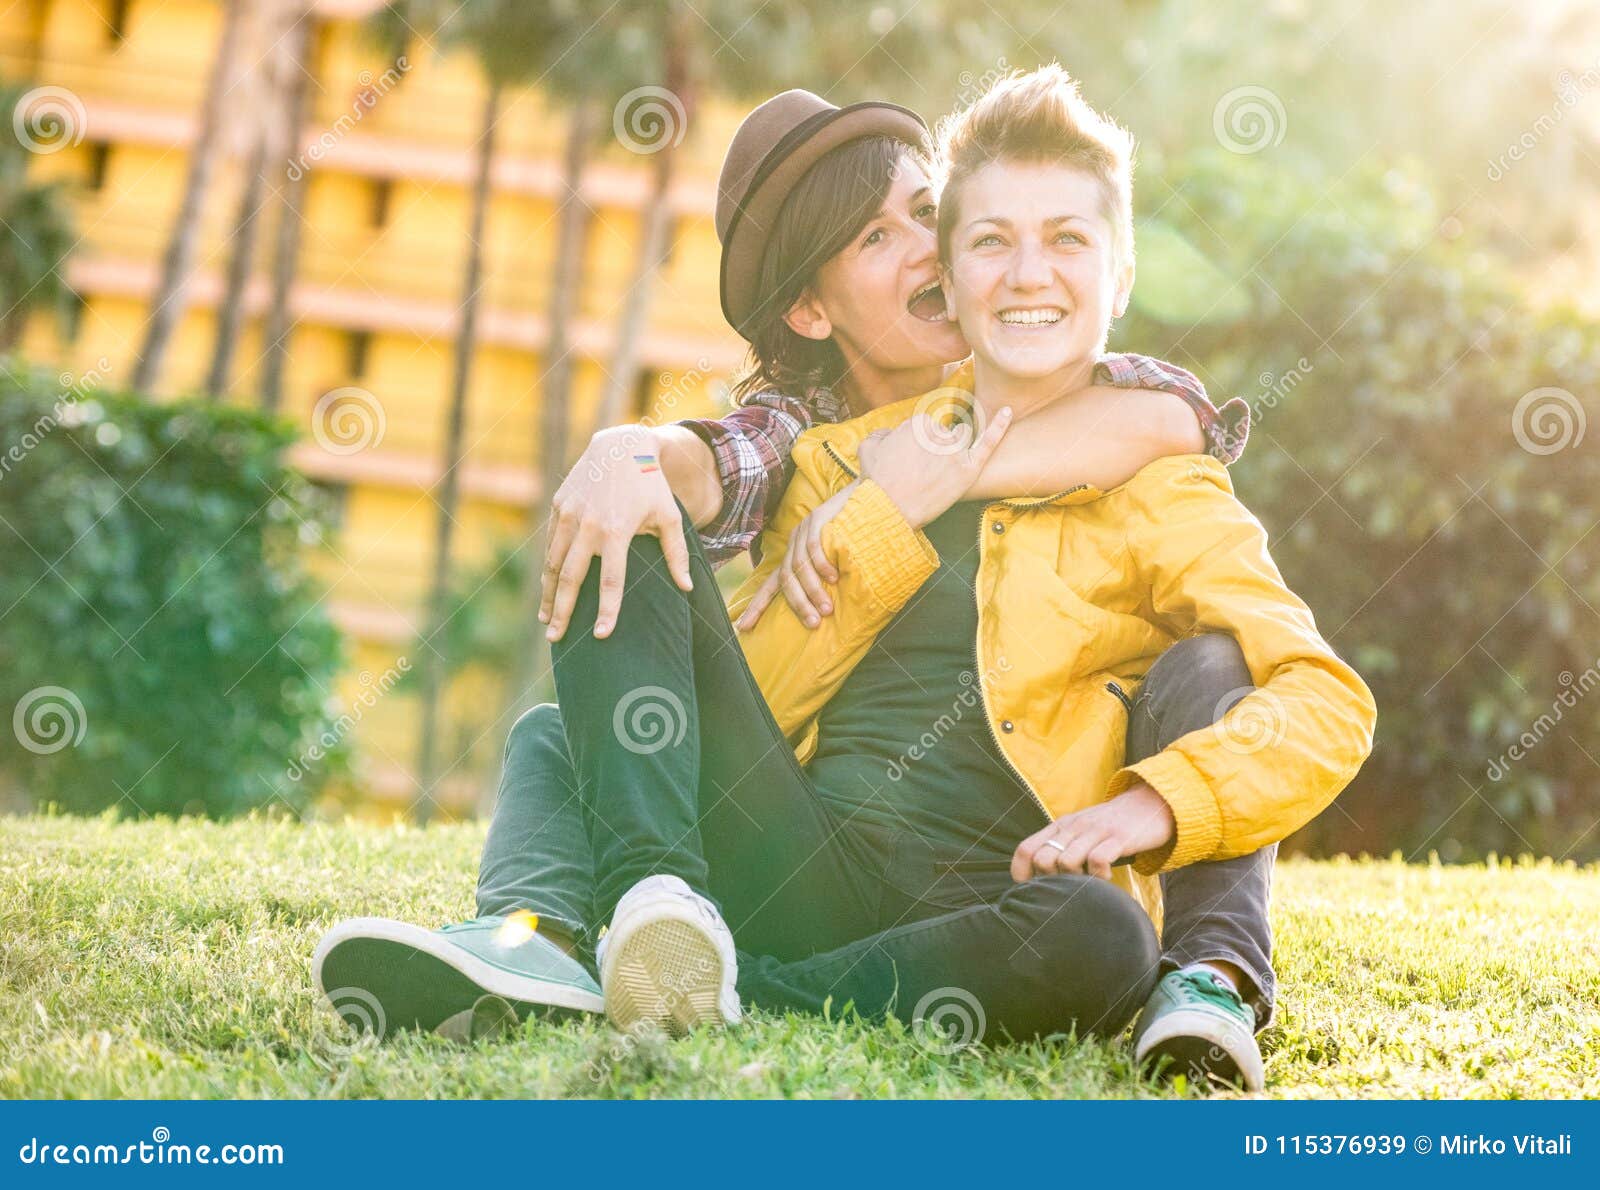 Free Images : man, female, romance, romantic, together 